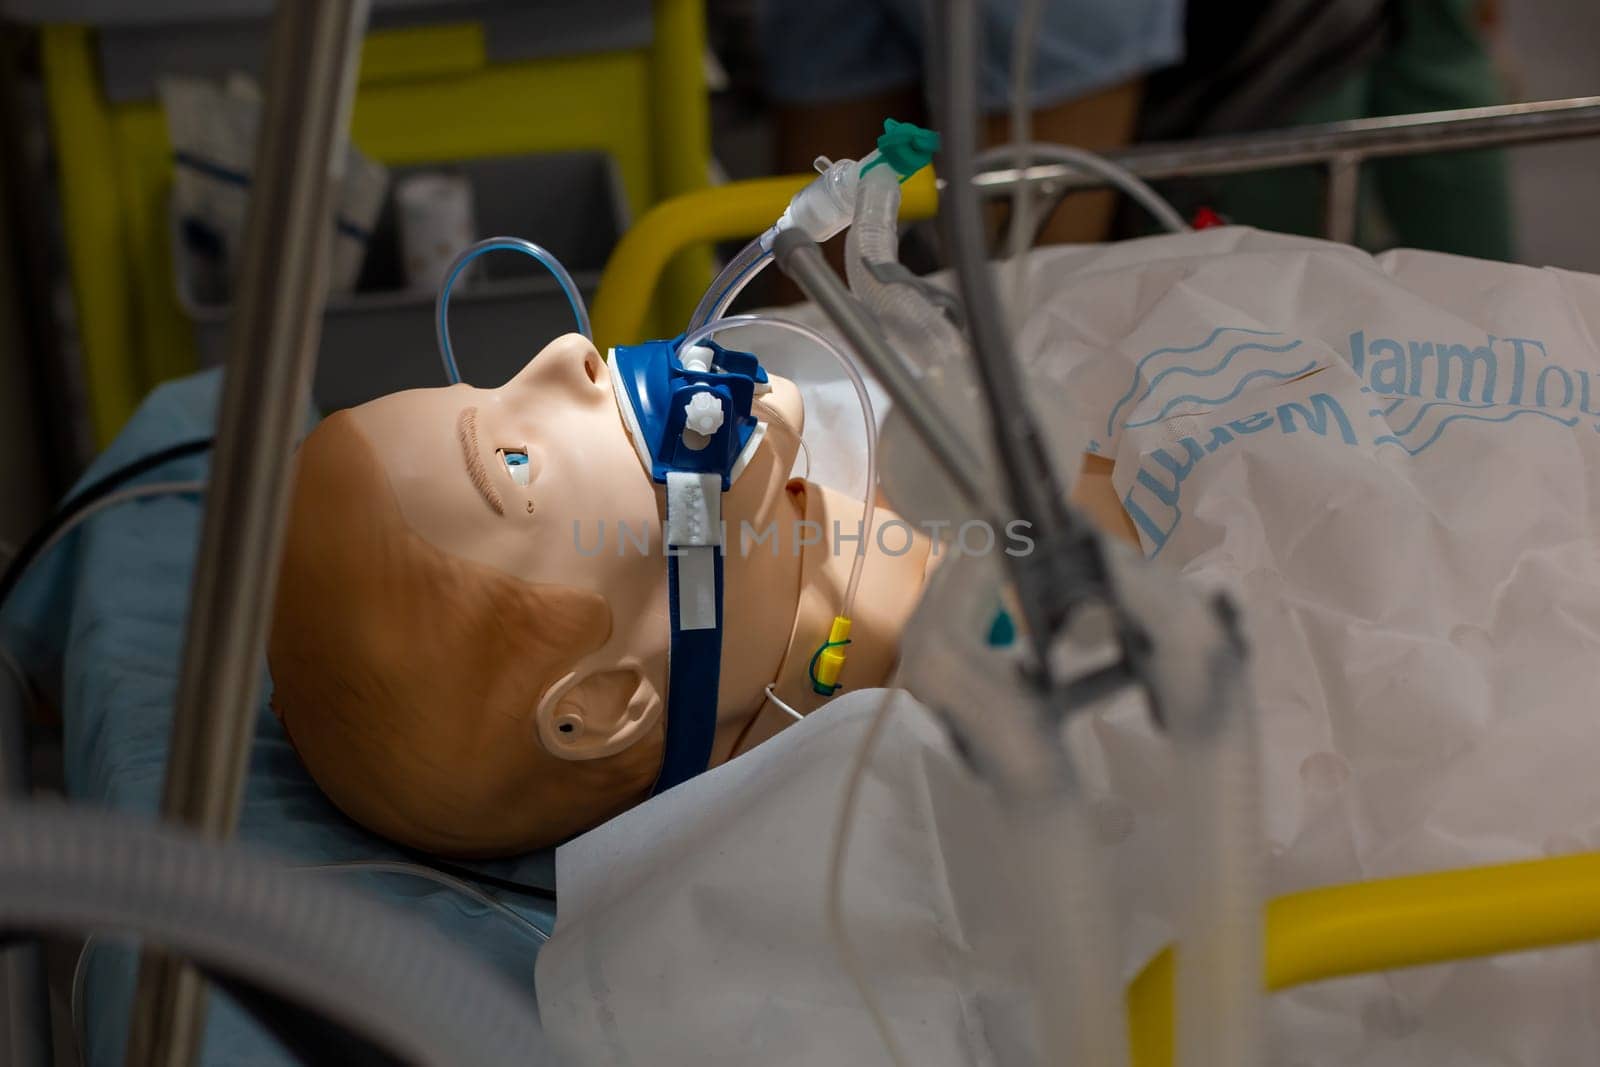 Moscow, Moscow region, Russia - 03.09.2023:Medical training dummy with ventilation equipment in an ICU setting, for educational purposes